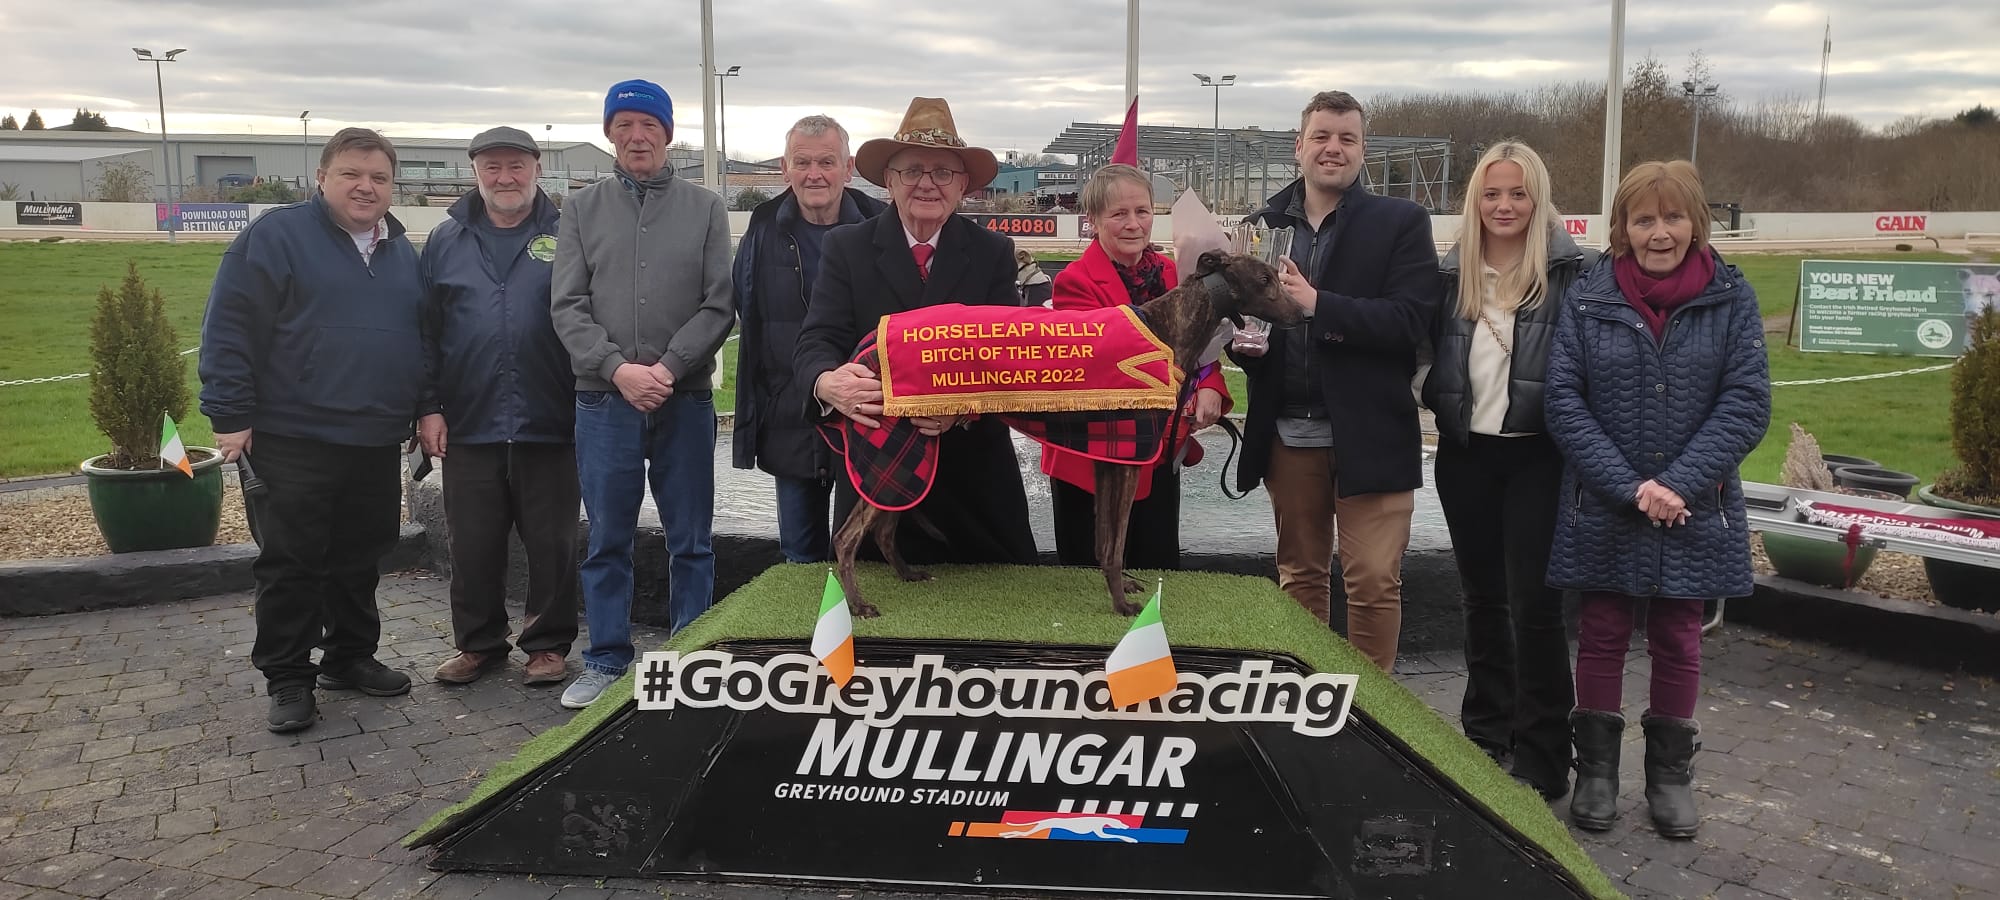 Ann and Sean McGuiness receiving the trophy for RPGTV Mullingar Greyhound of the Year for Horseleap Nelly who is pictured on the winner’s podium. Mark MaGuire makes the presentation on behalf of RPGTV with friends & family of the winners. 